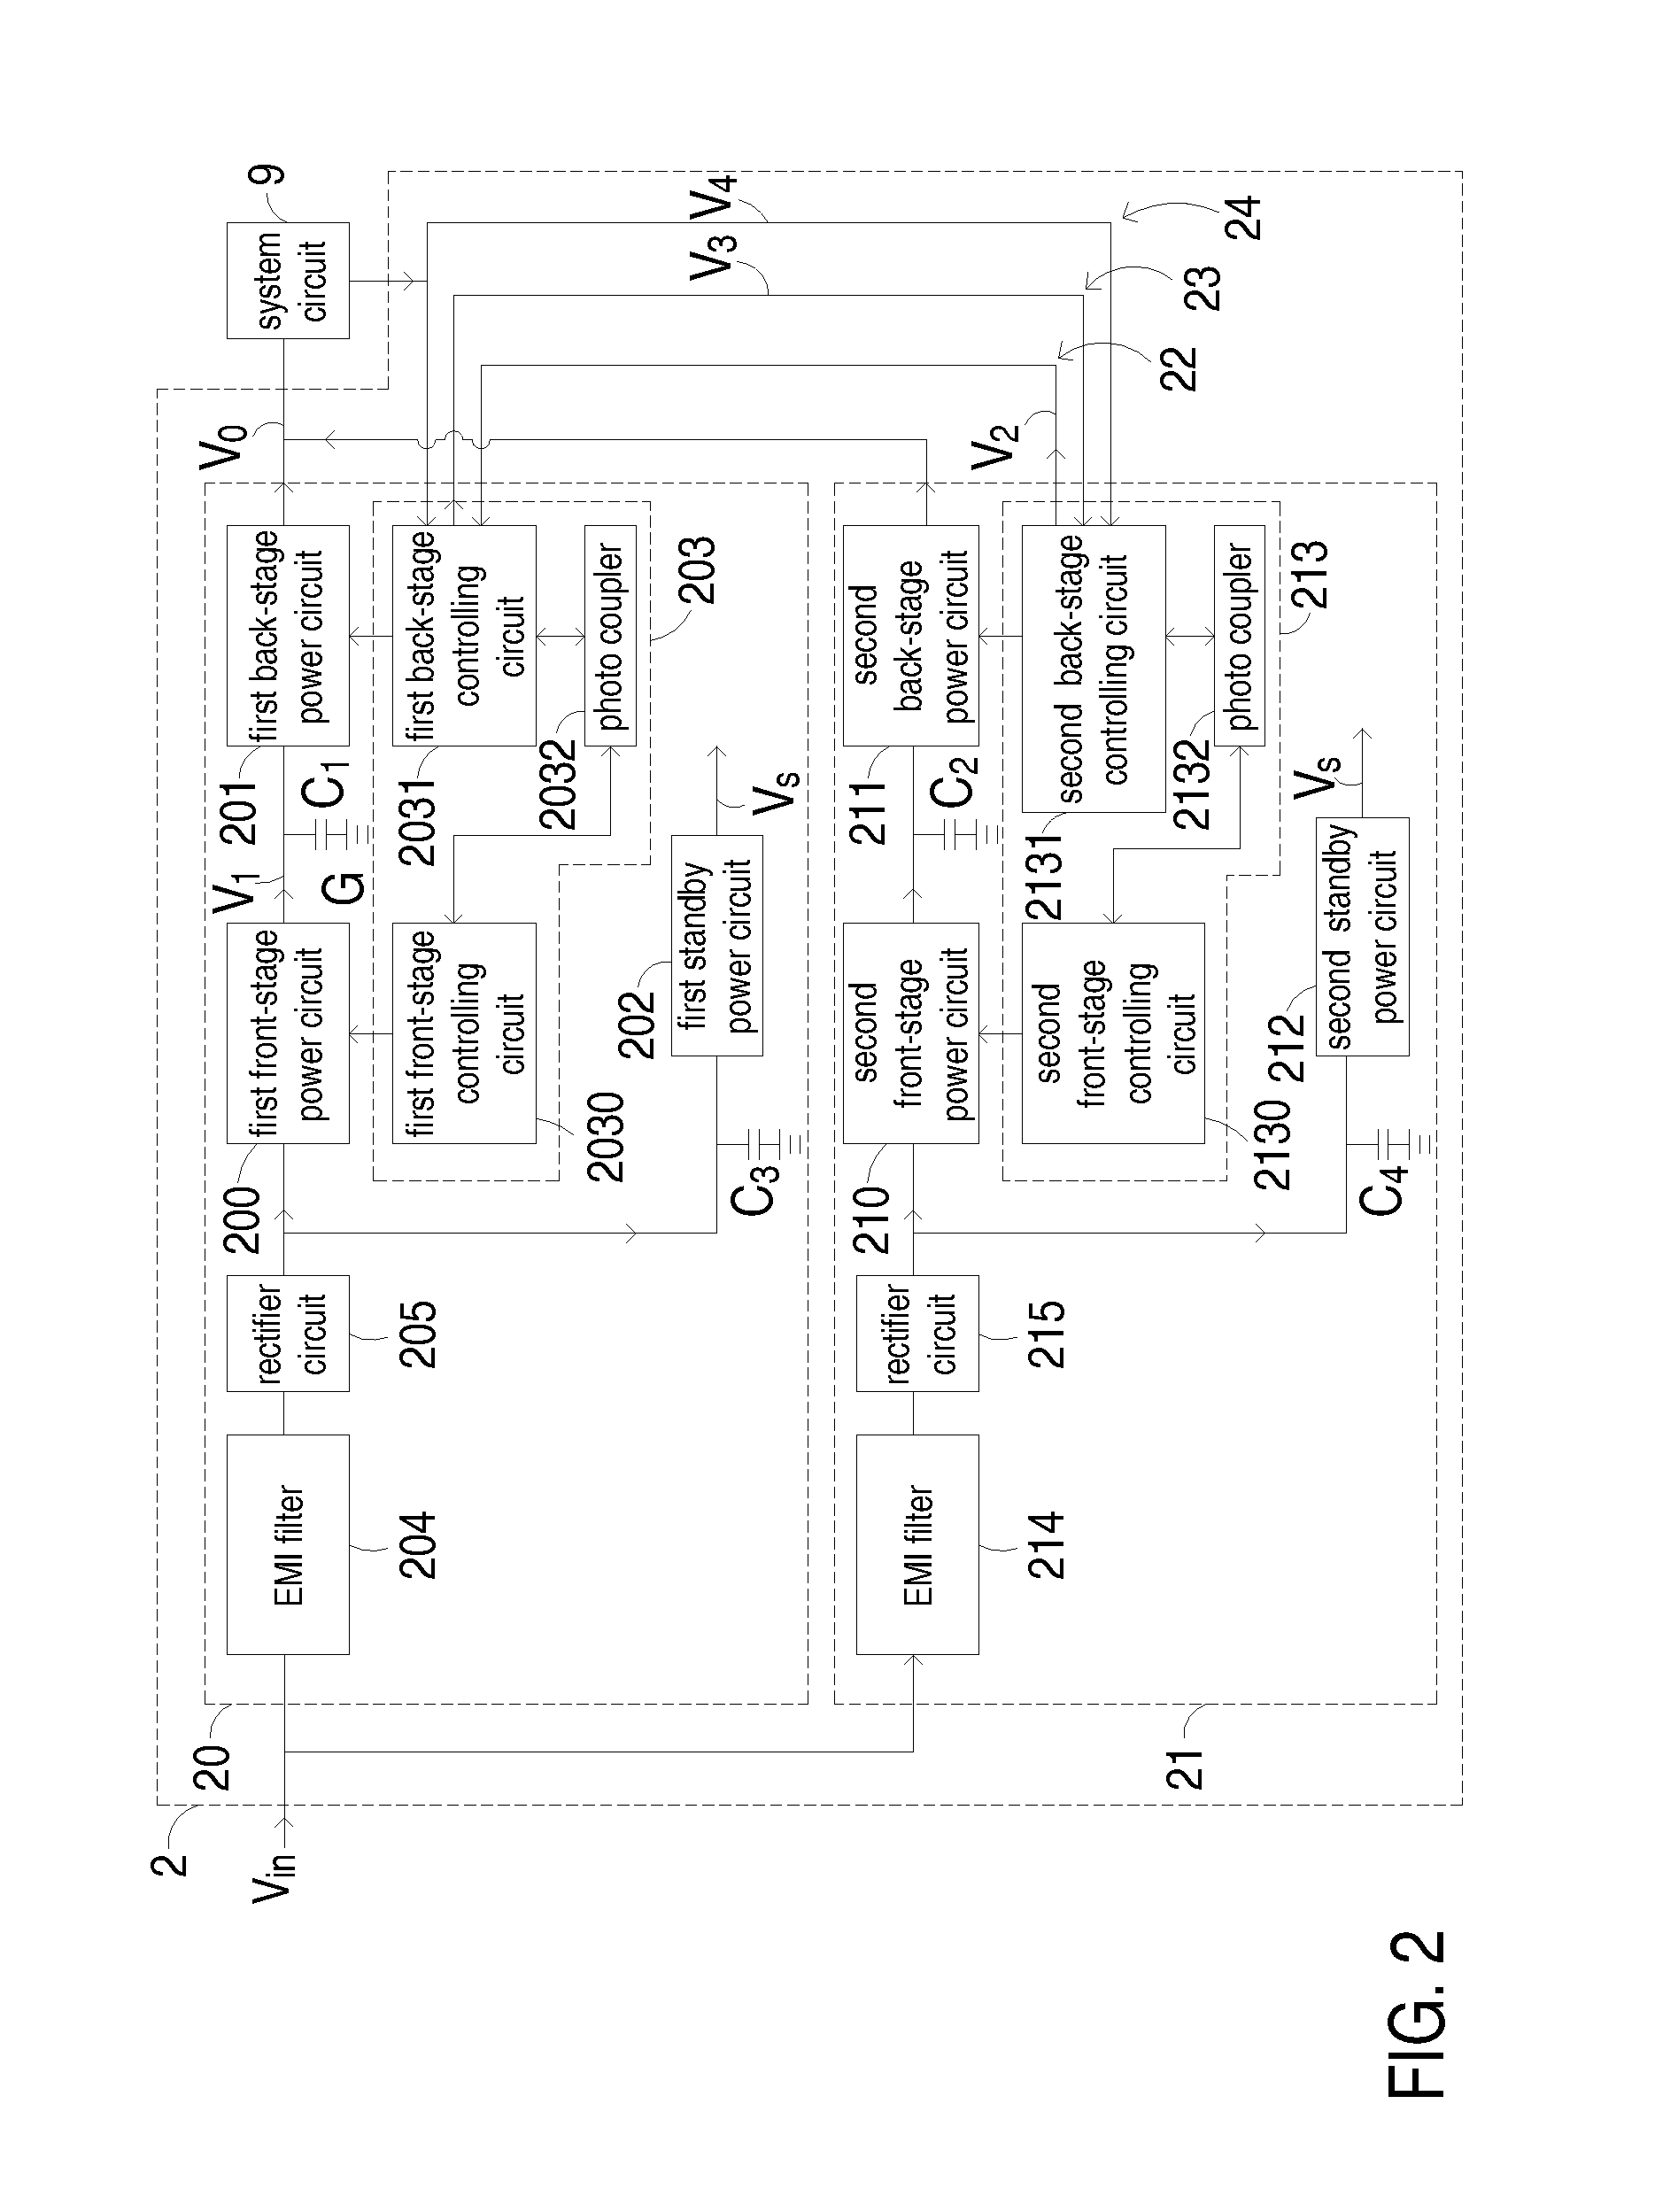 Power supply apparatus and power supply system with plural power supply apparatuses